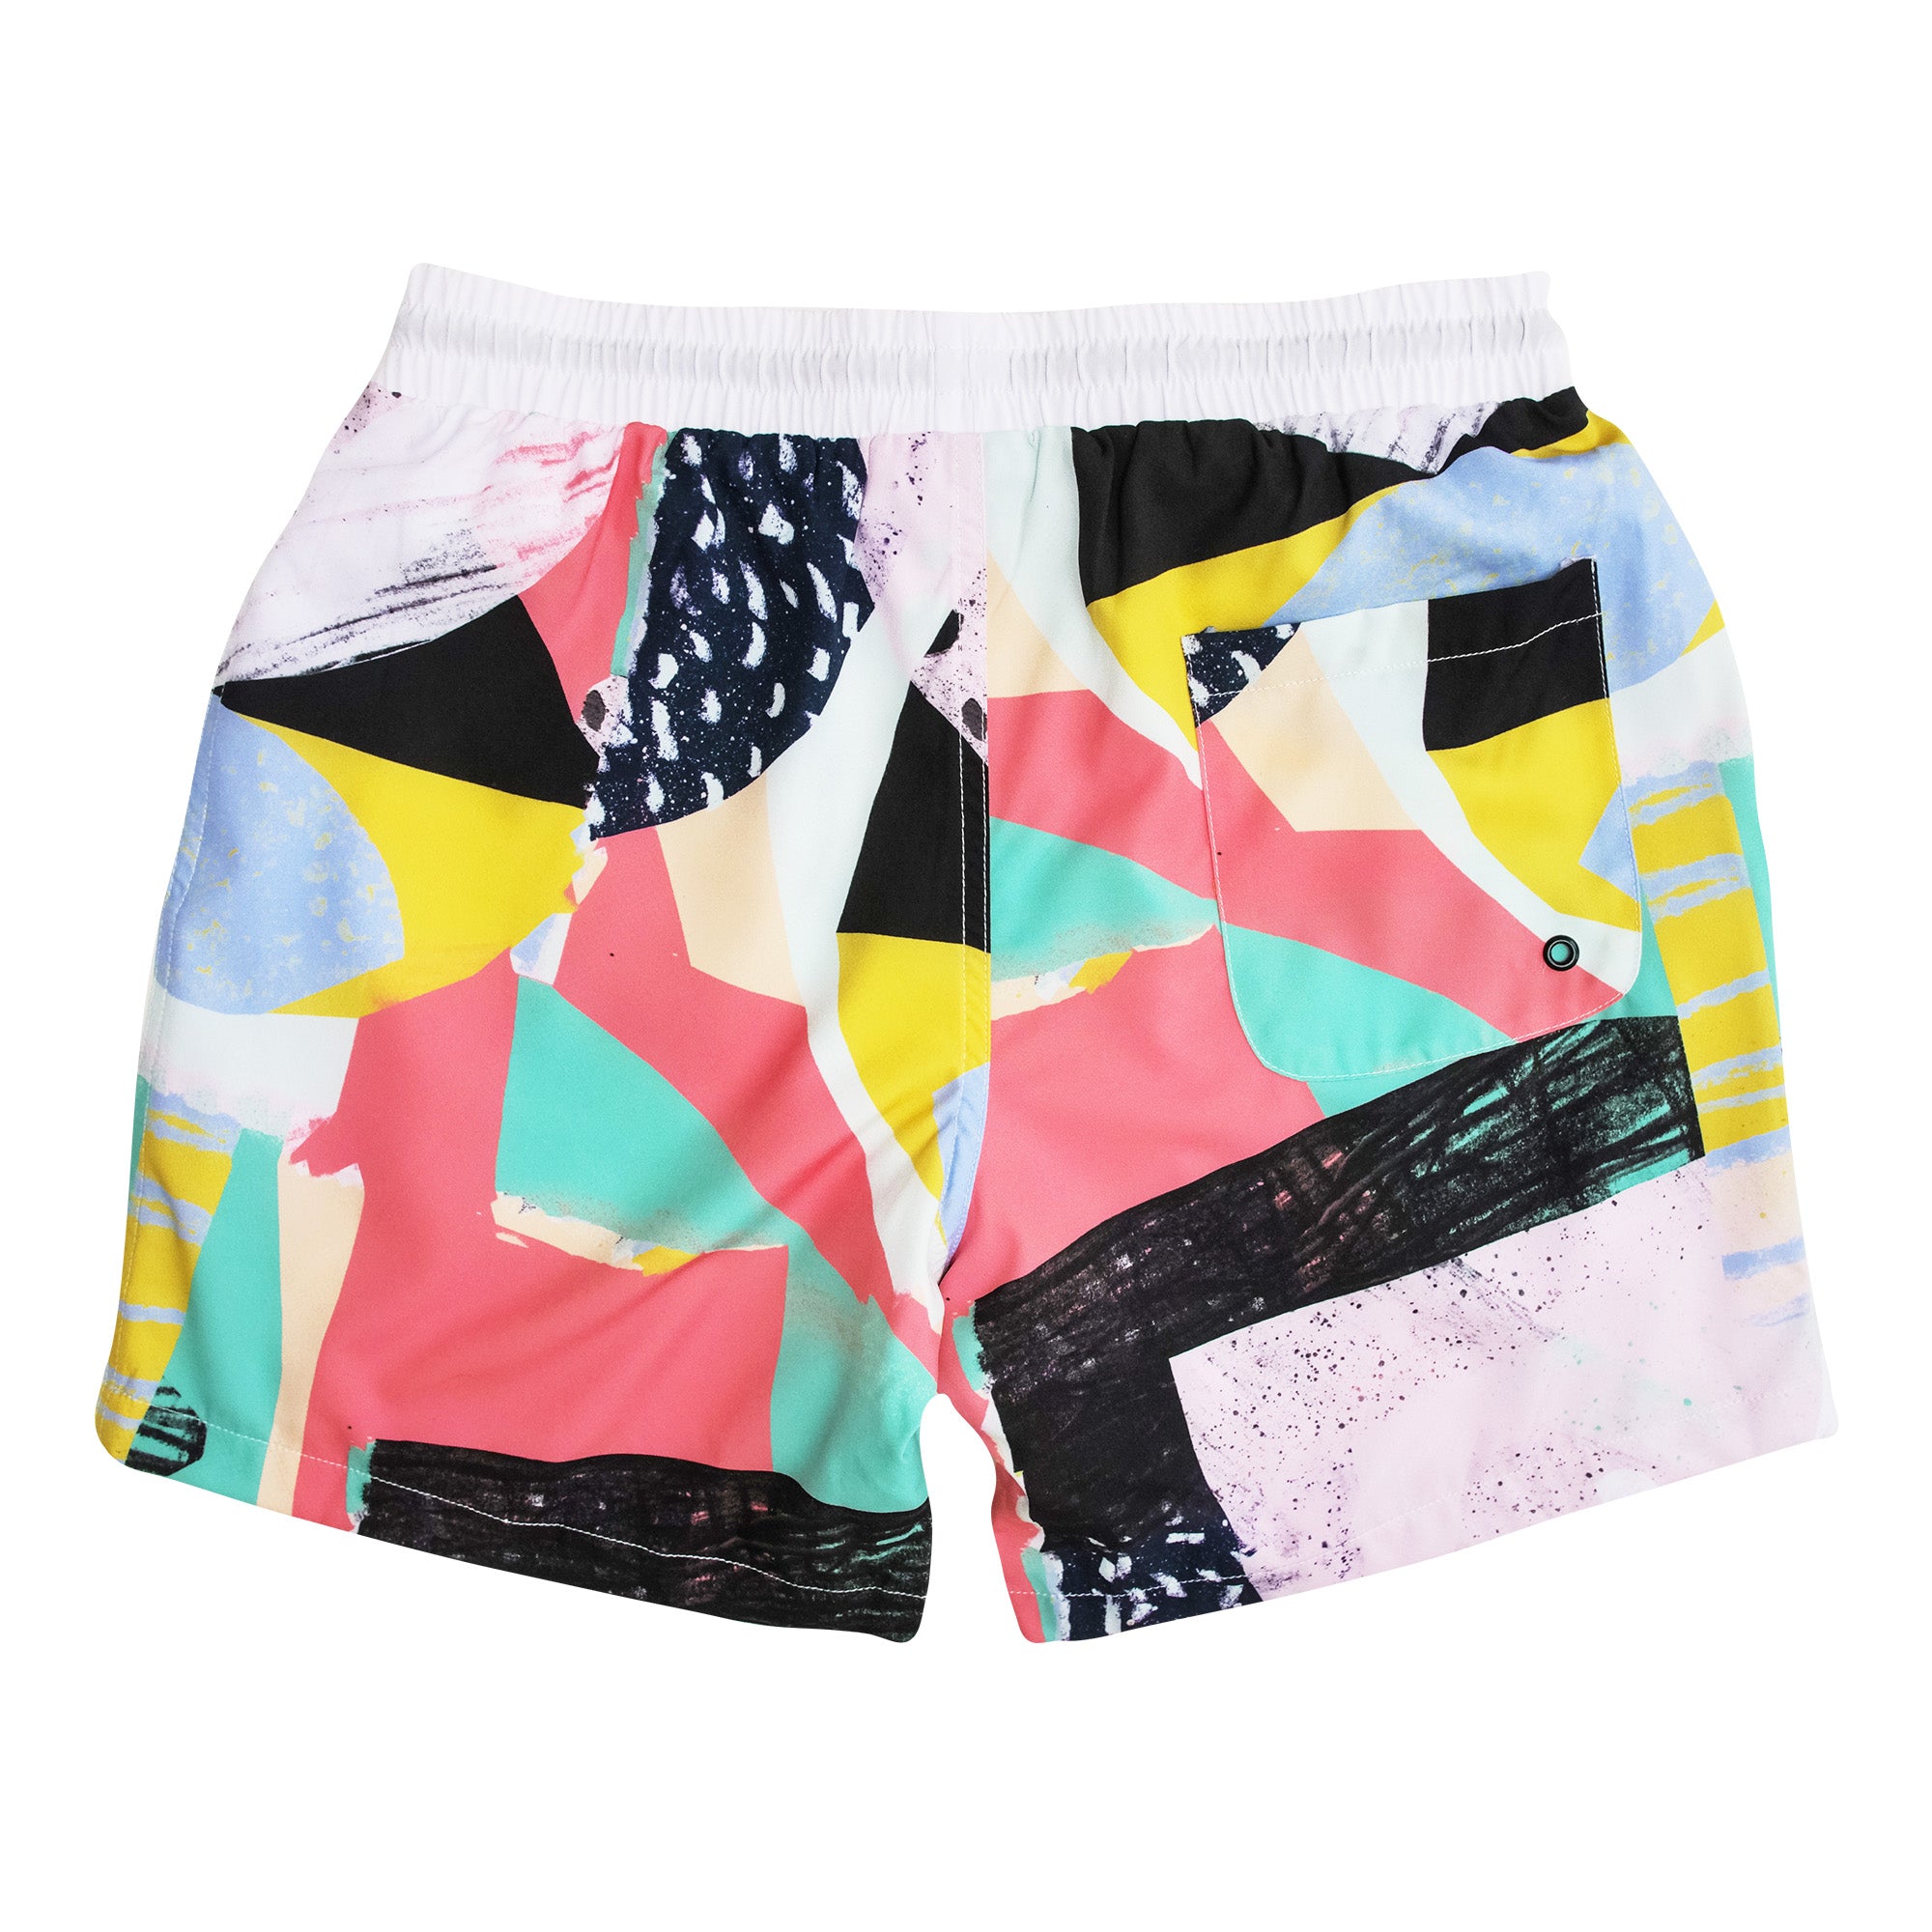 Into the Abbiss - Swim Trunks